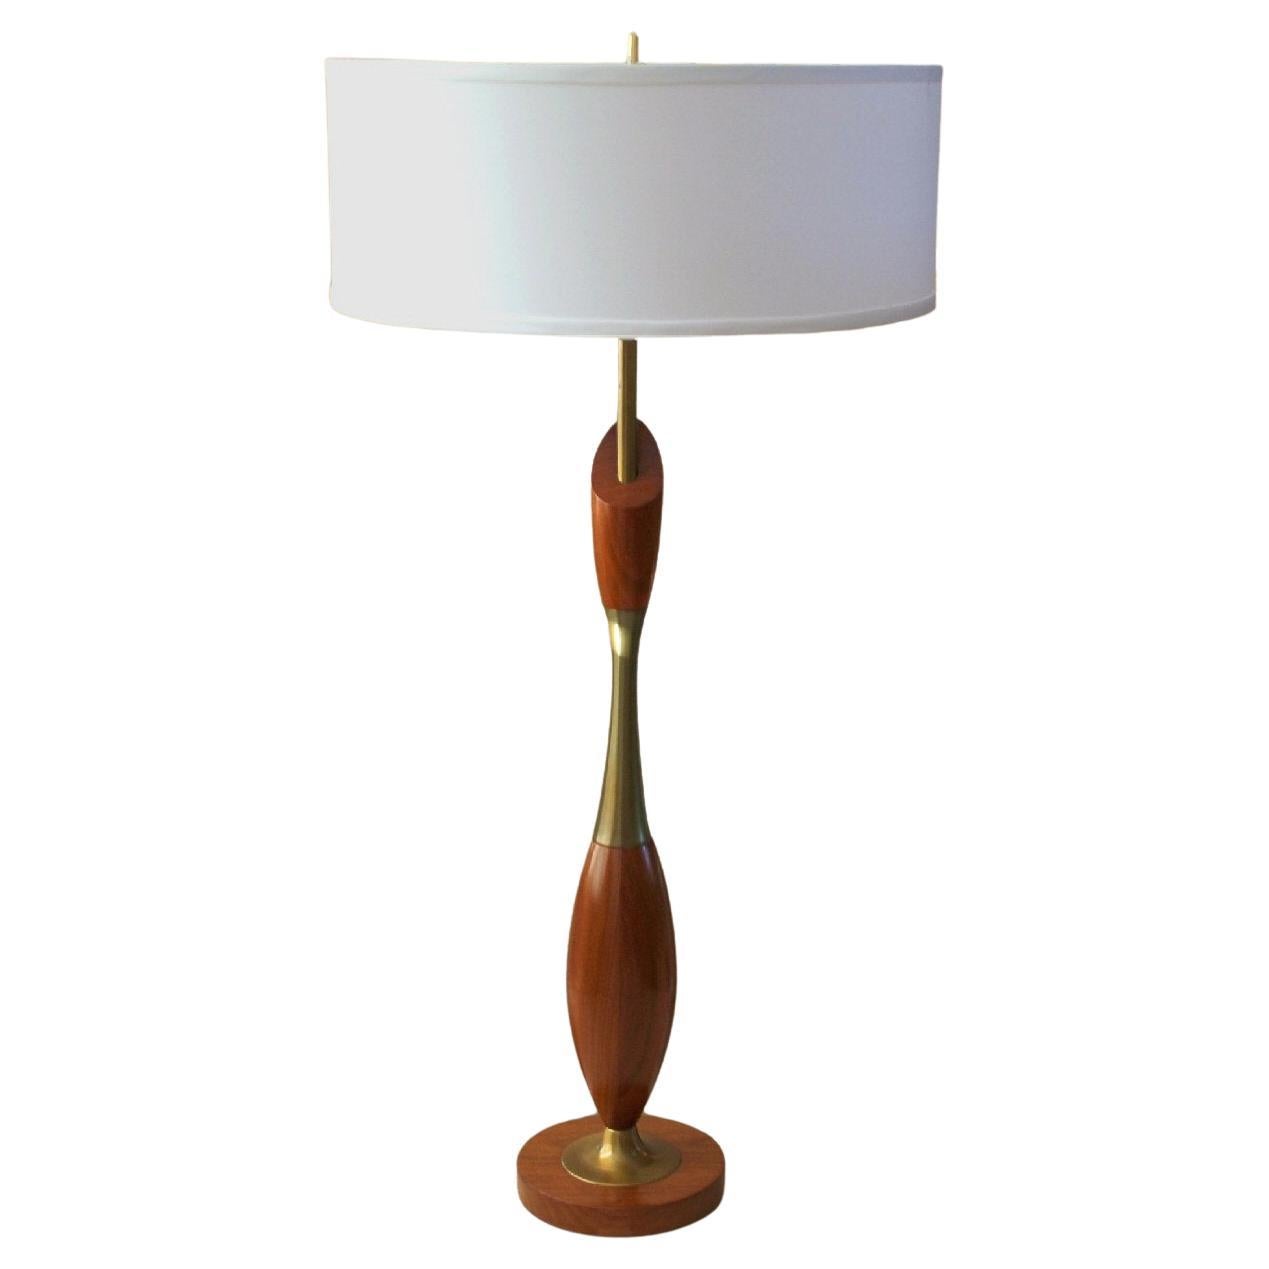 Magnificent Modeline Mid Century Danish Modern Rosewood Table Lamp 1958 Pearsall